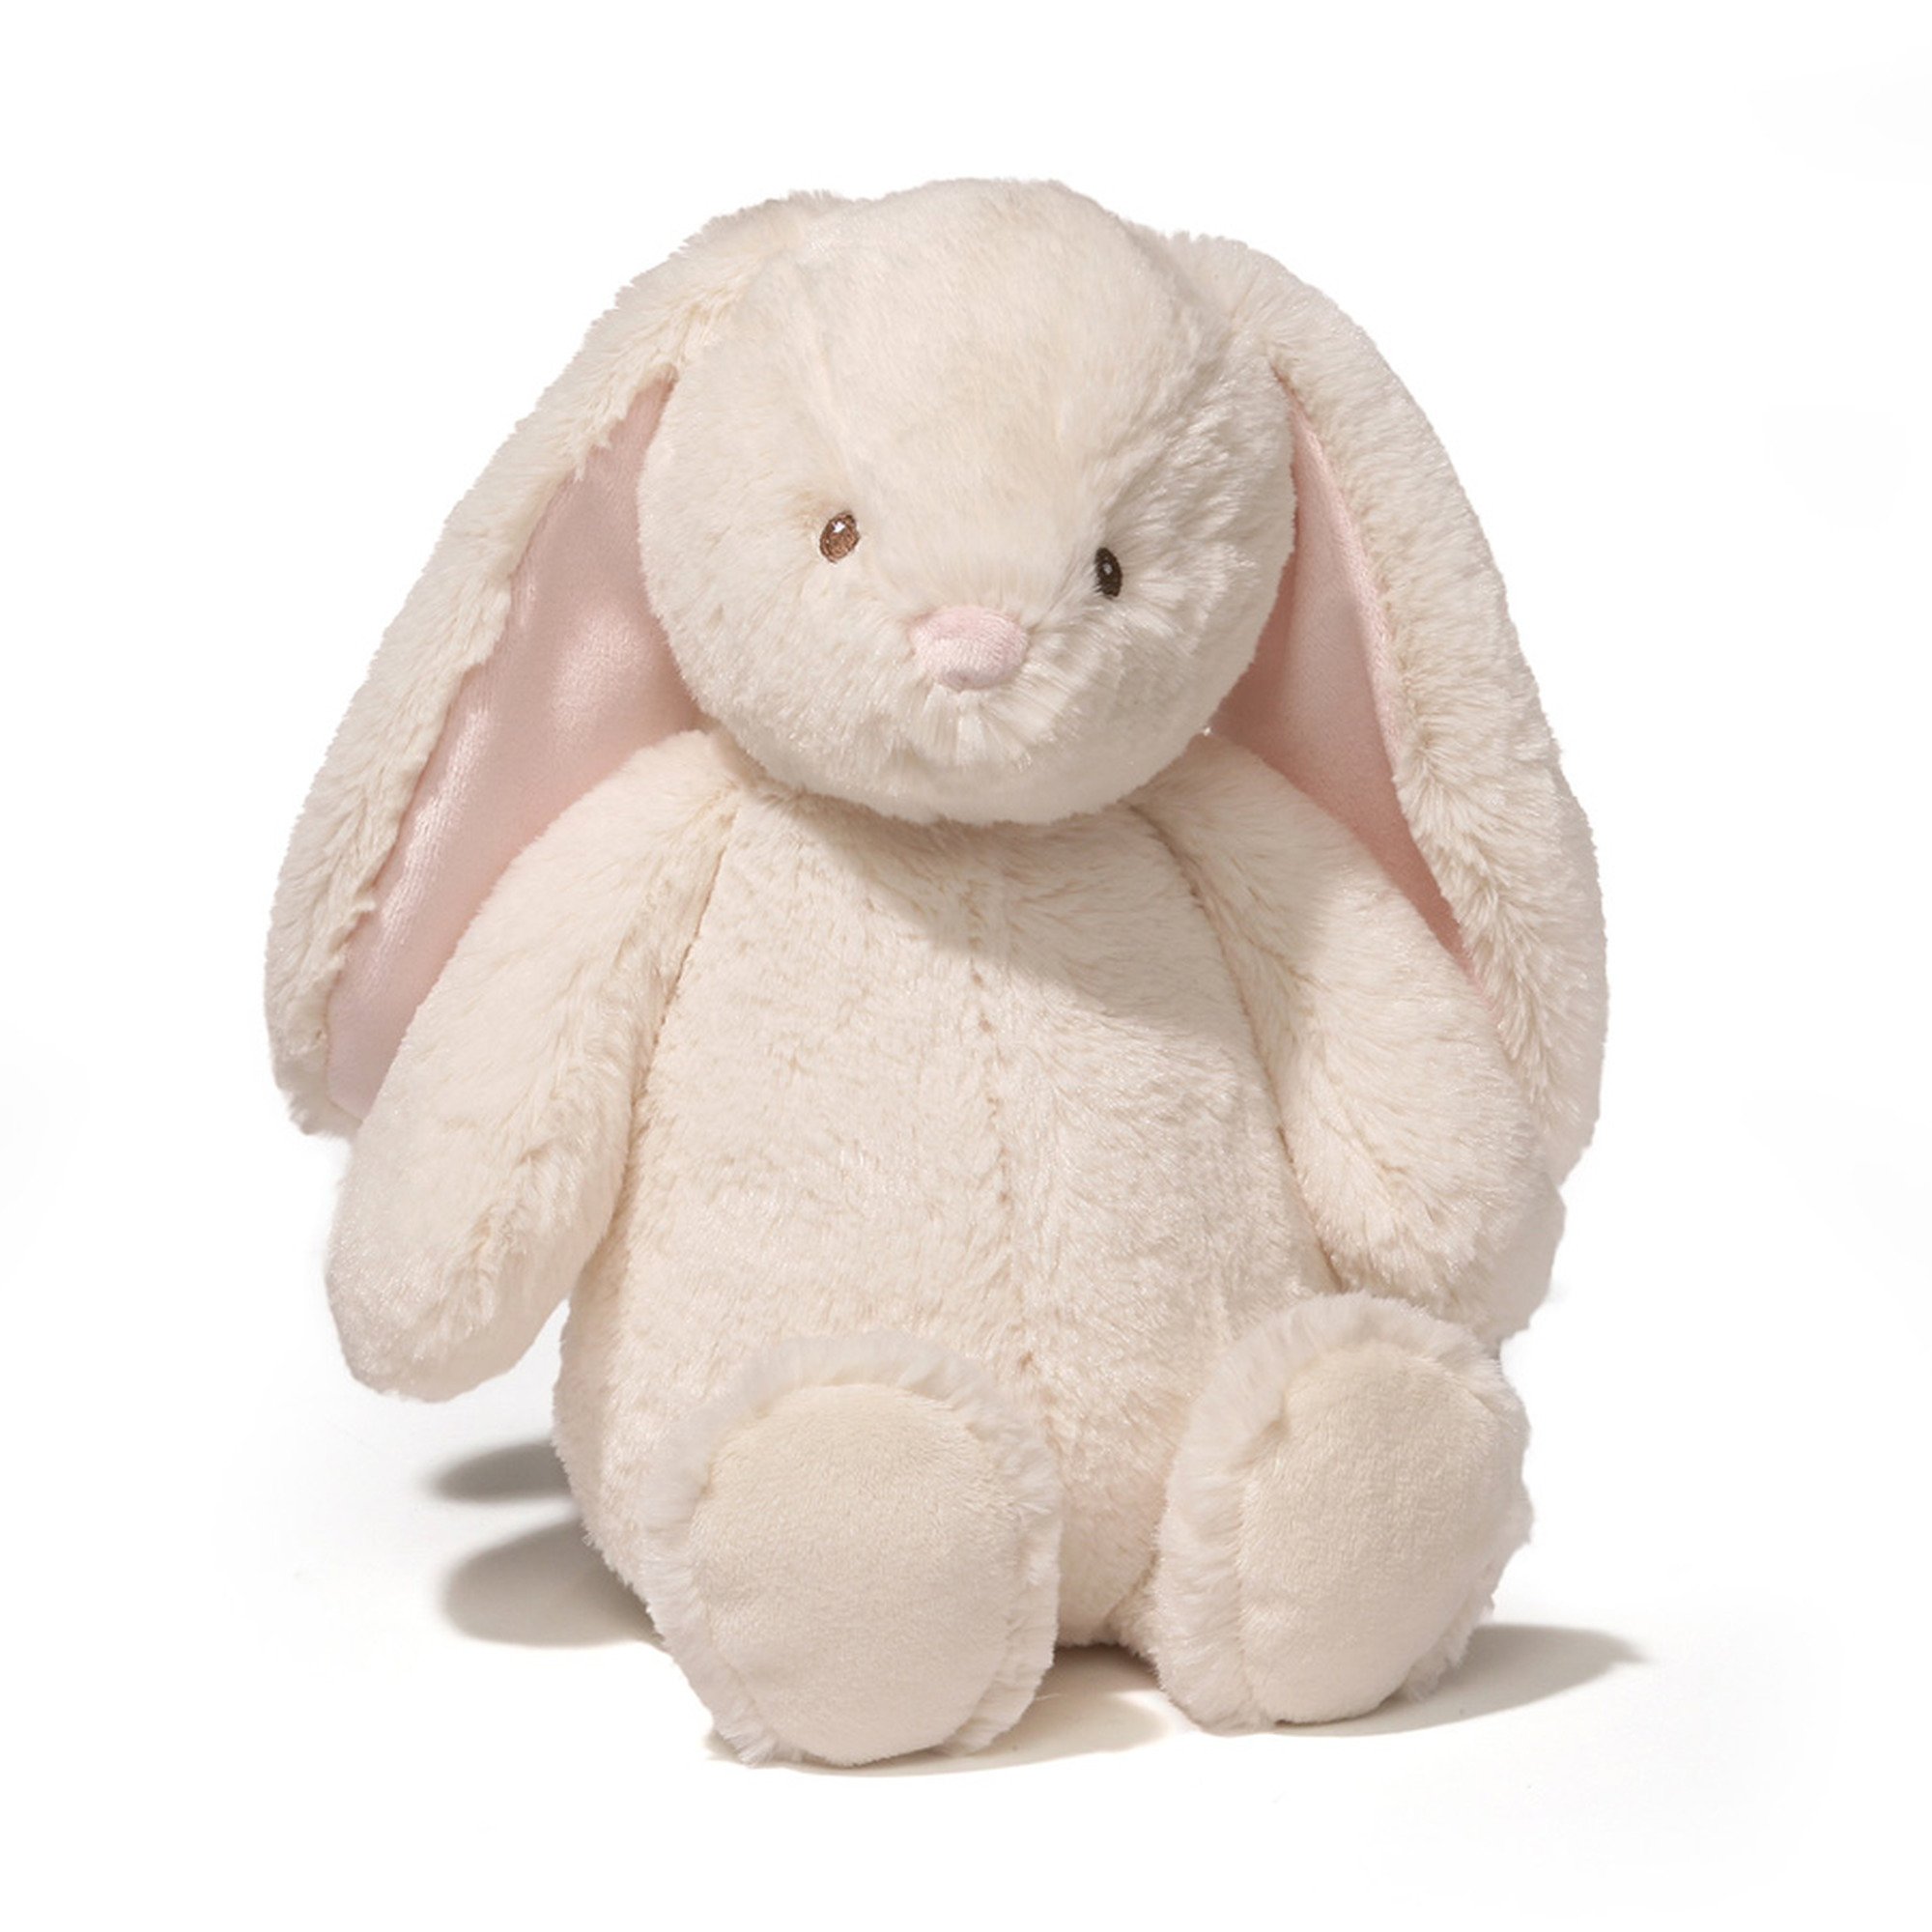 Ditter Bunny Gund Dilly Dallies 6" 